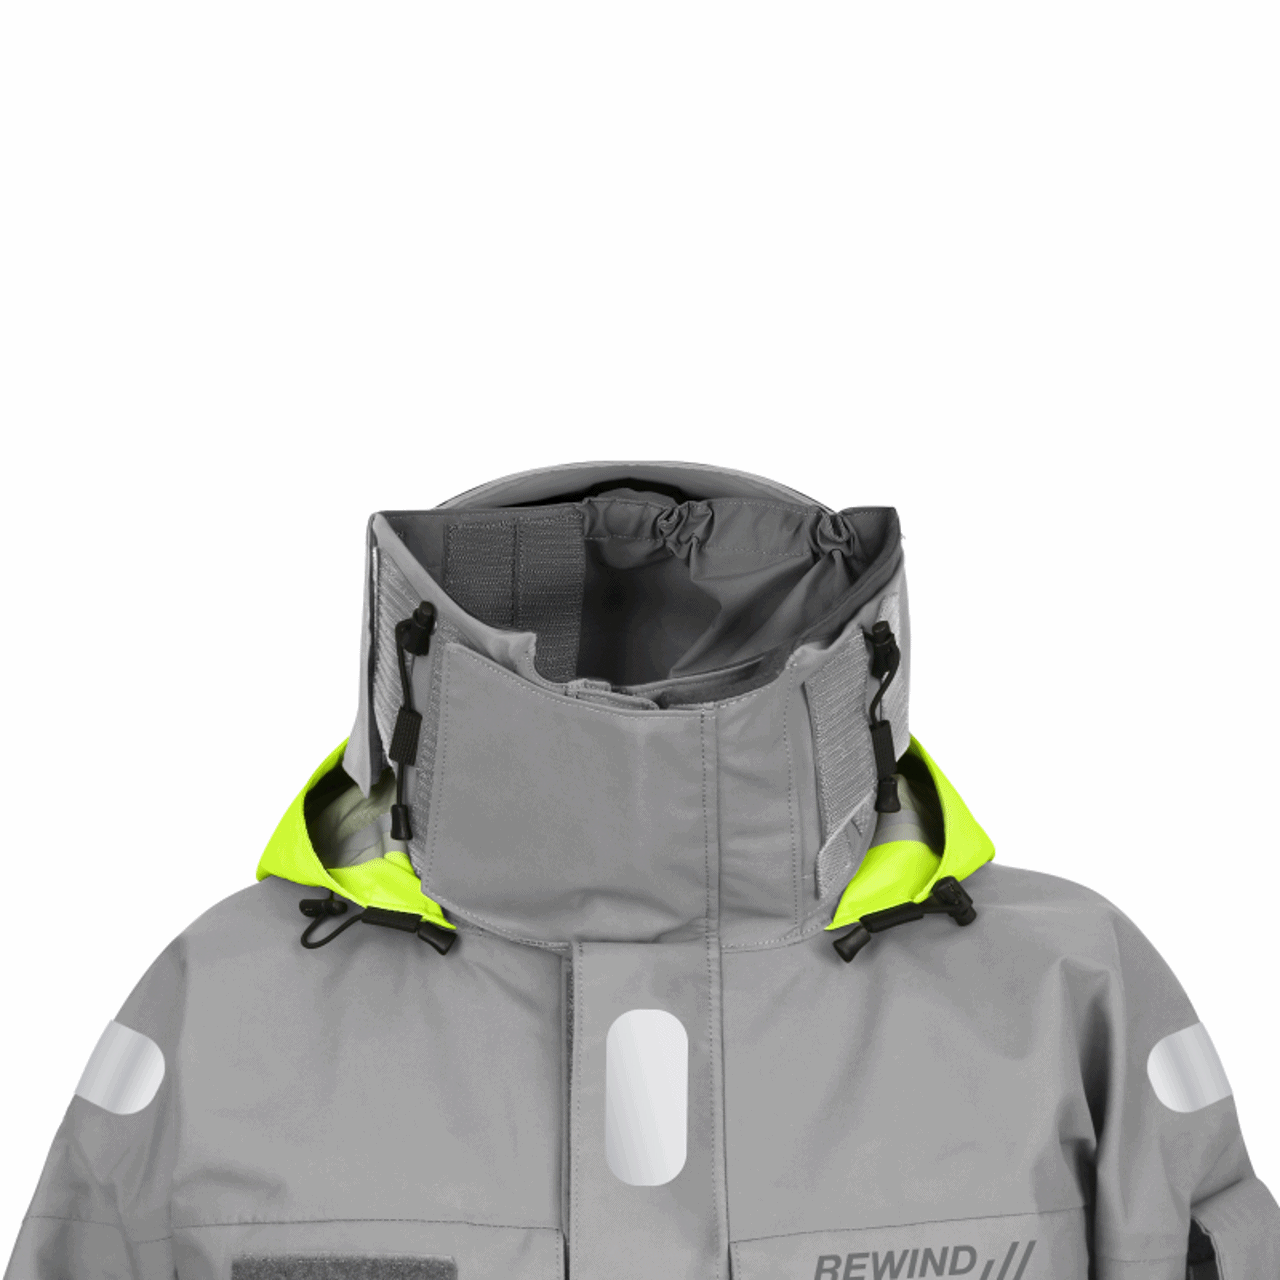 Offshore Yacht Jacket (GRAY) NEW